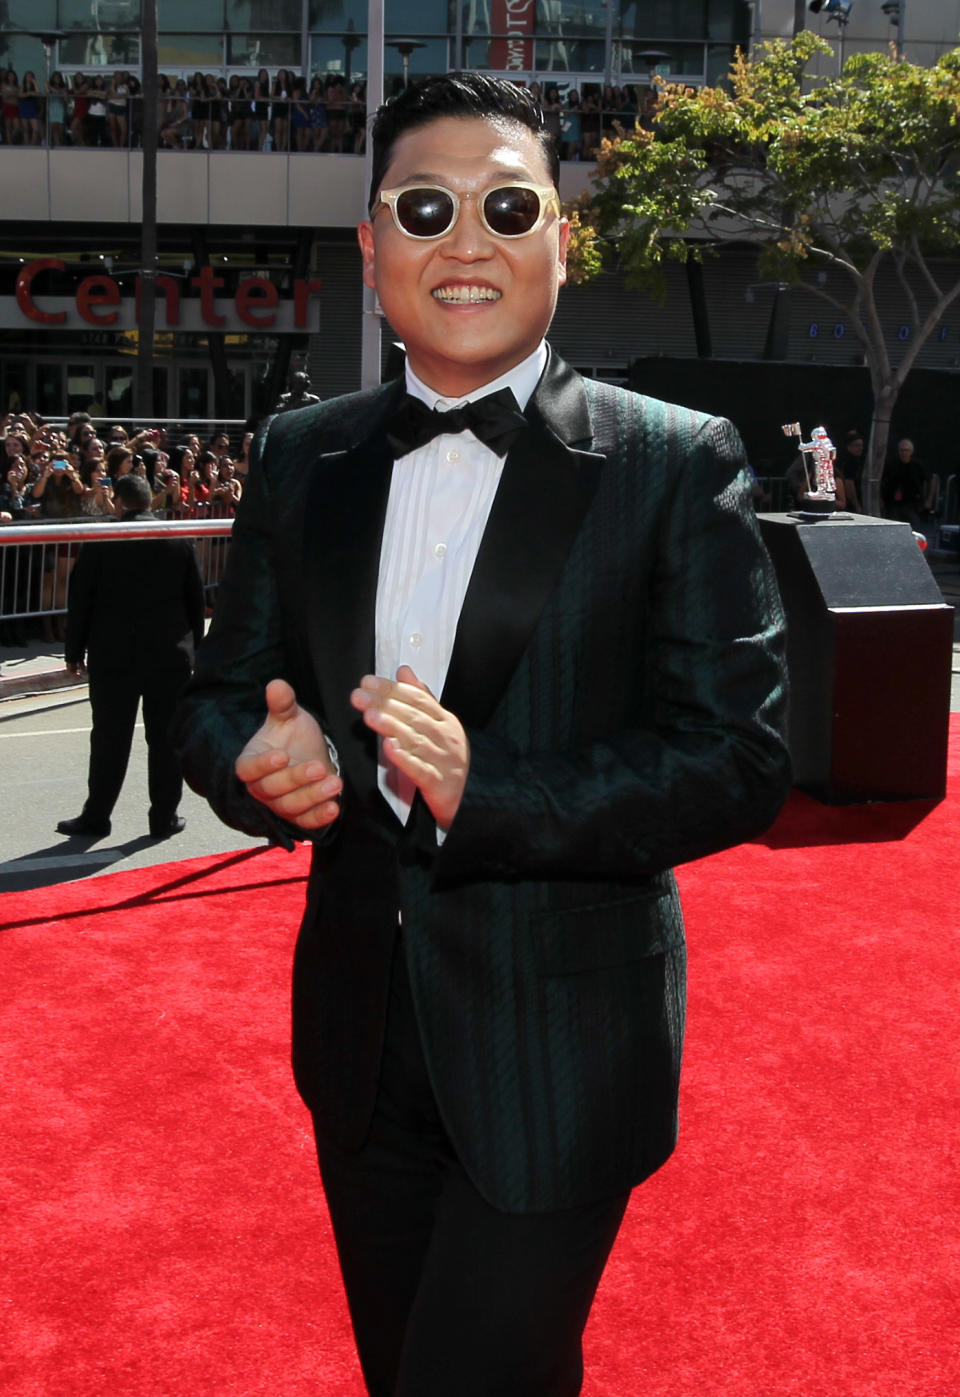 South Korean rapper PSY arrives at the MTV Video Music Awards on Thursday, Sept. 6, 2012, in Los Angeles. (Photo by Matt Sayles/Invision/AP)